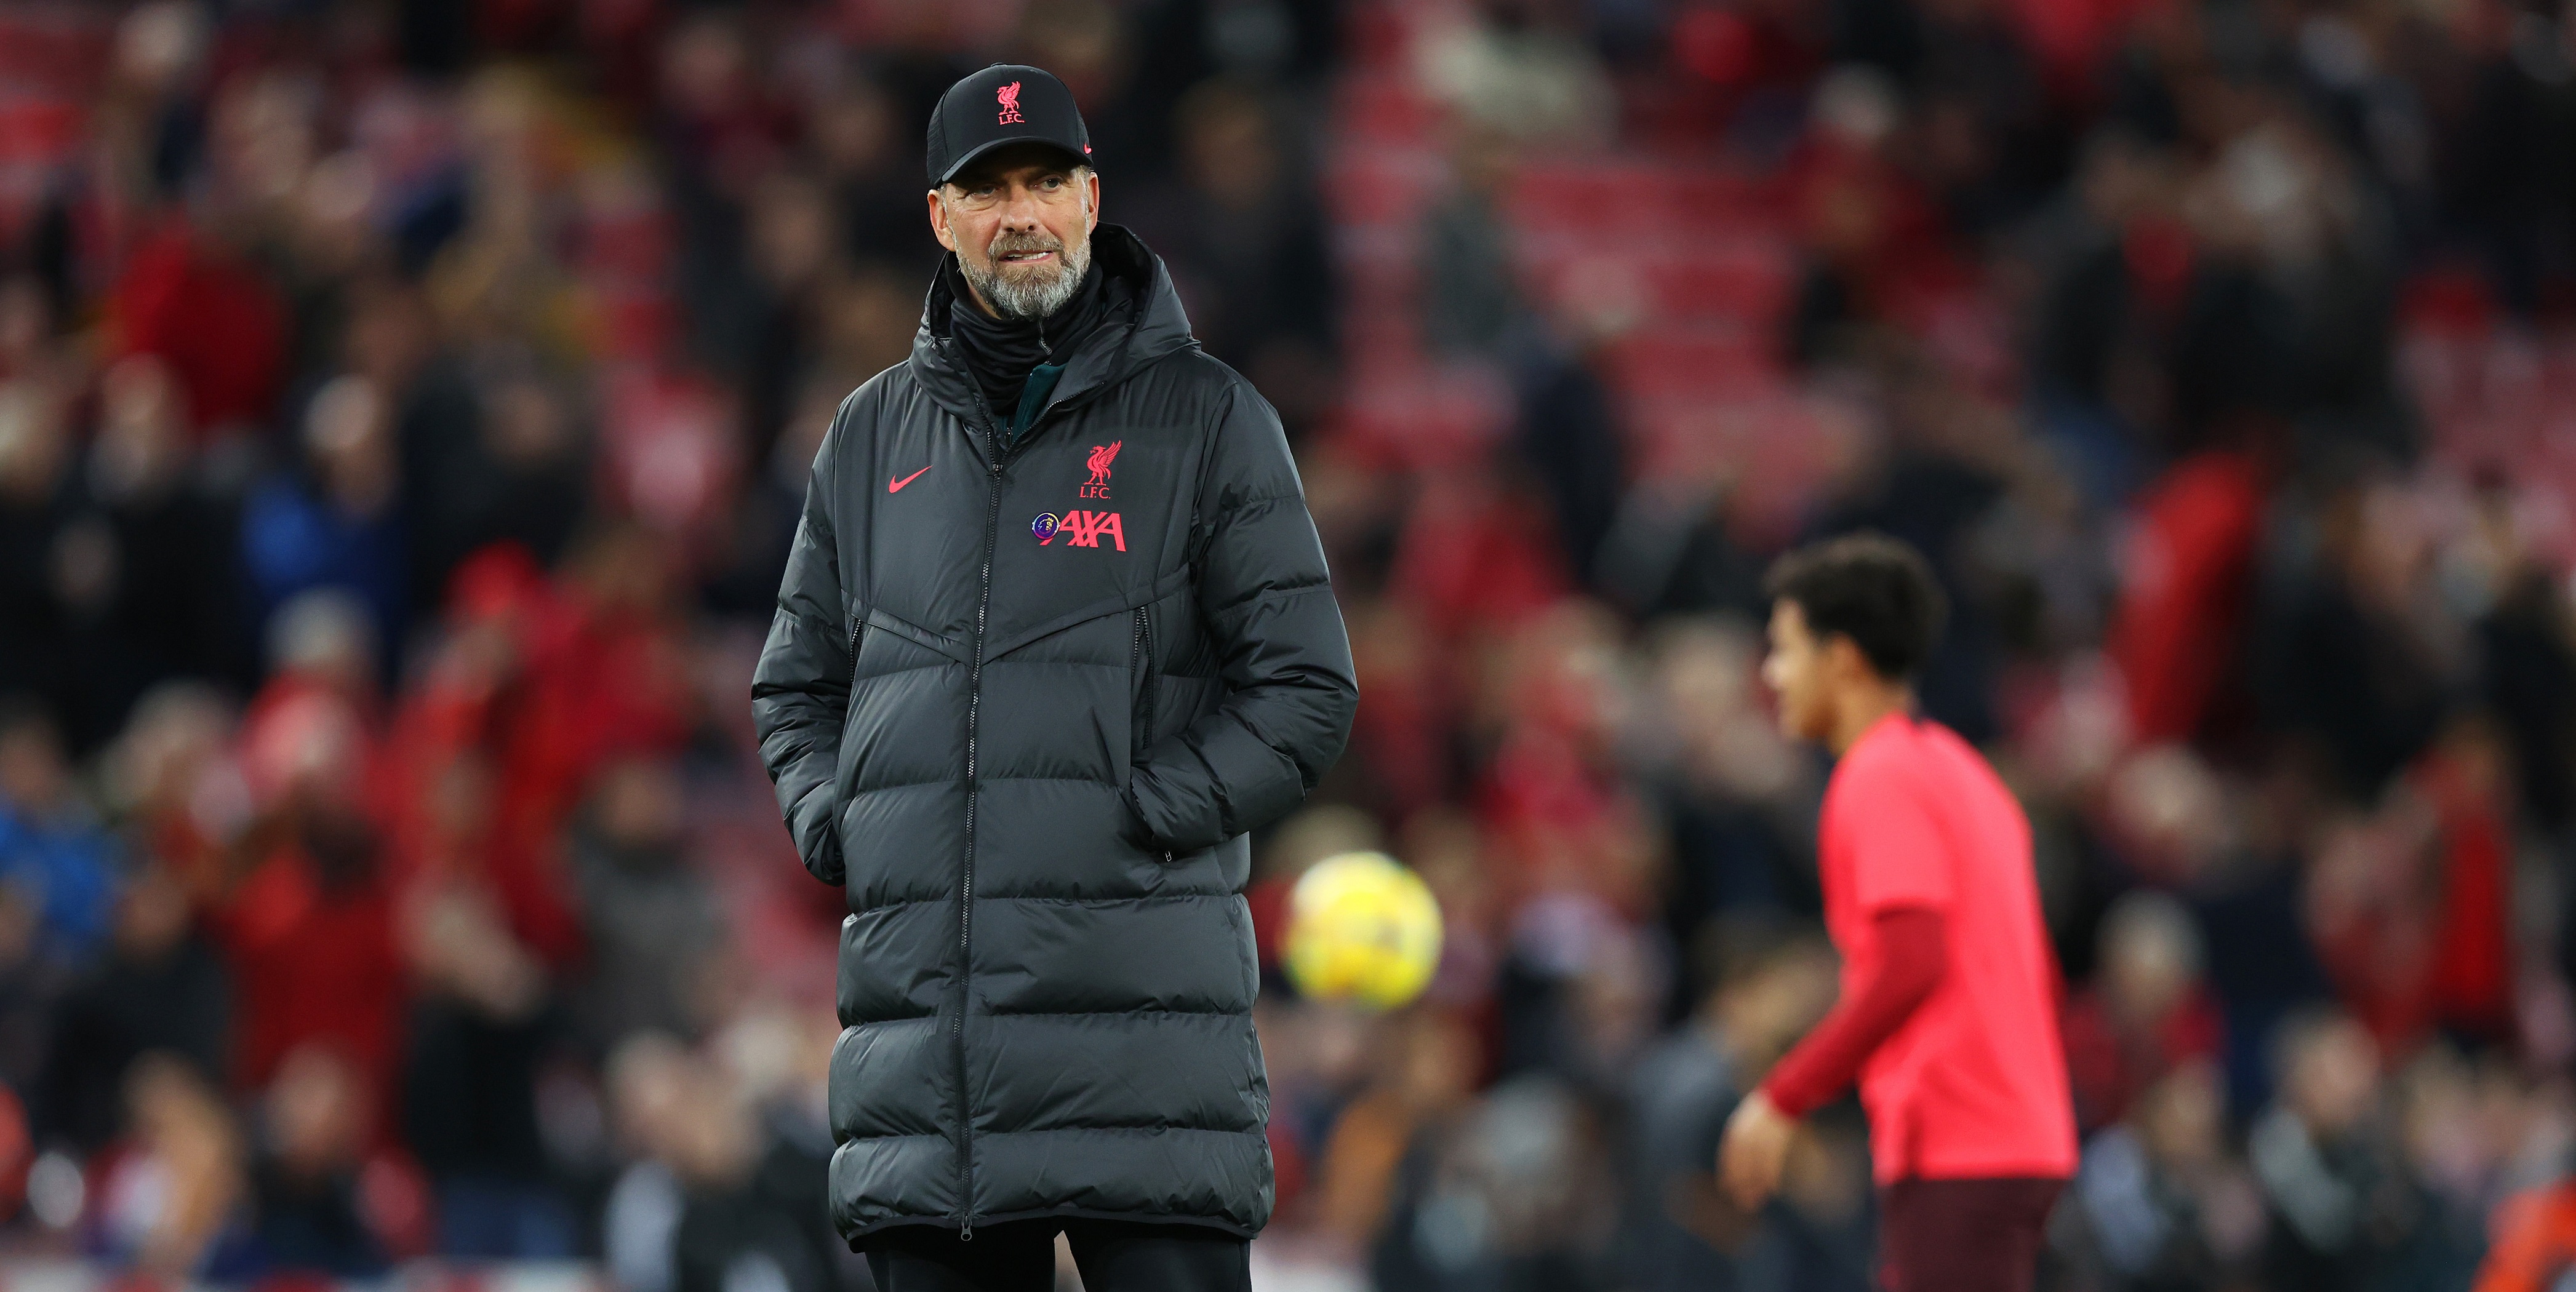 ‘Would it do Liverpool that much harm?’ – Steve Nicol makes surprising Liverpool suggestion regarding European football